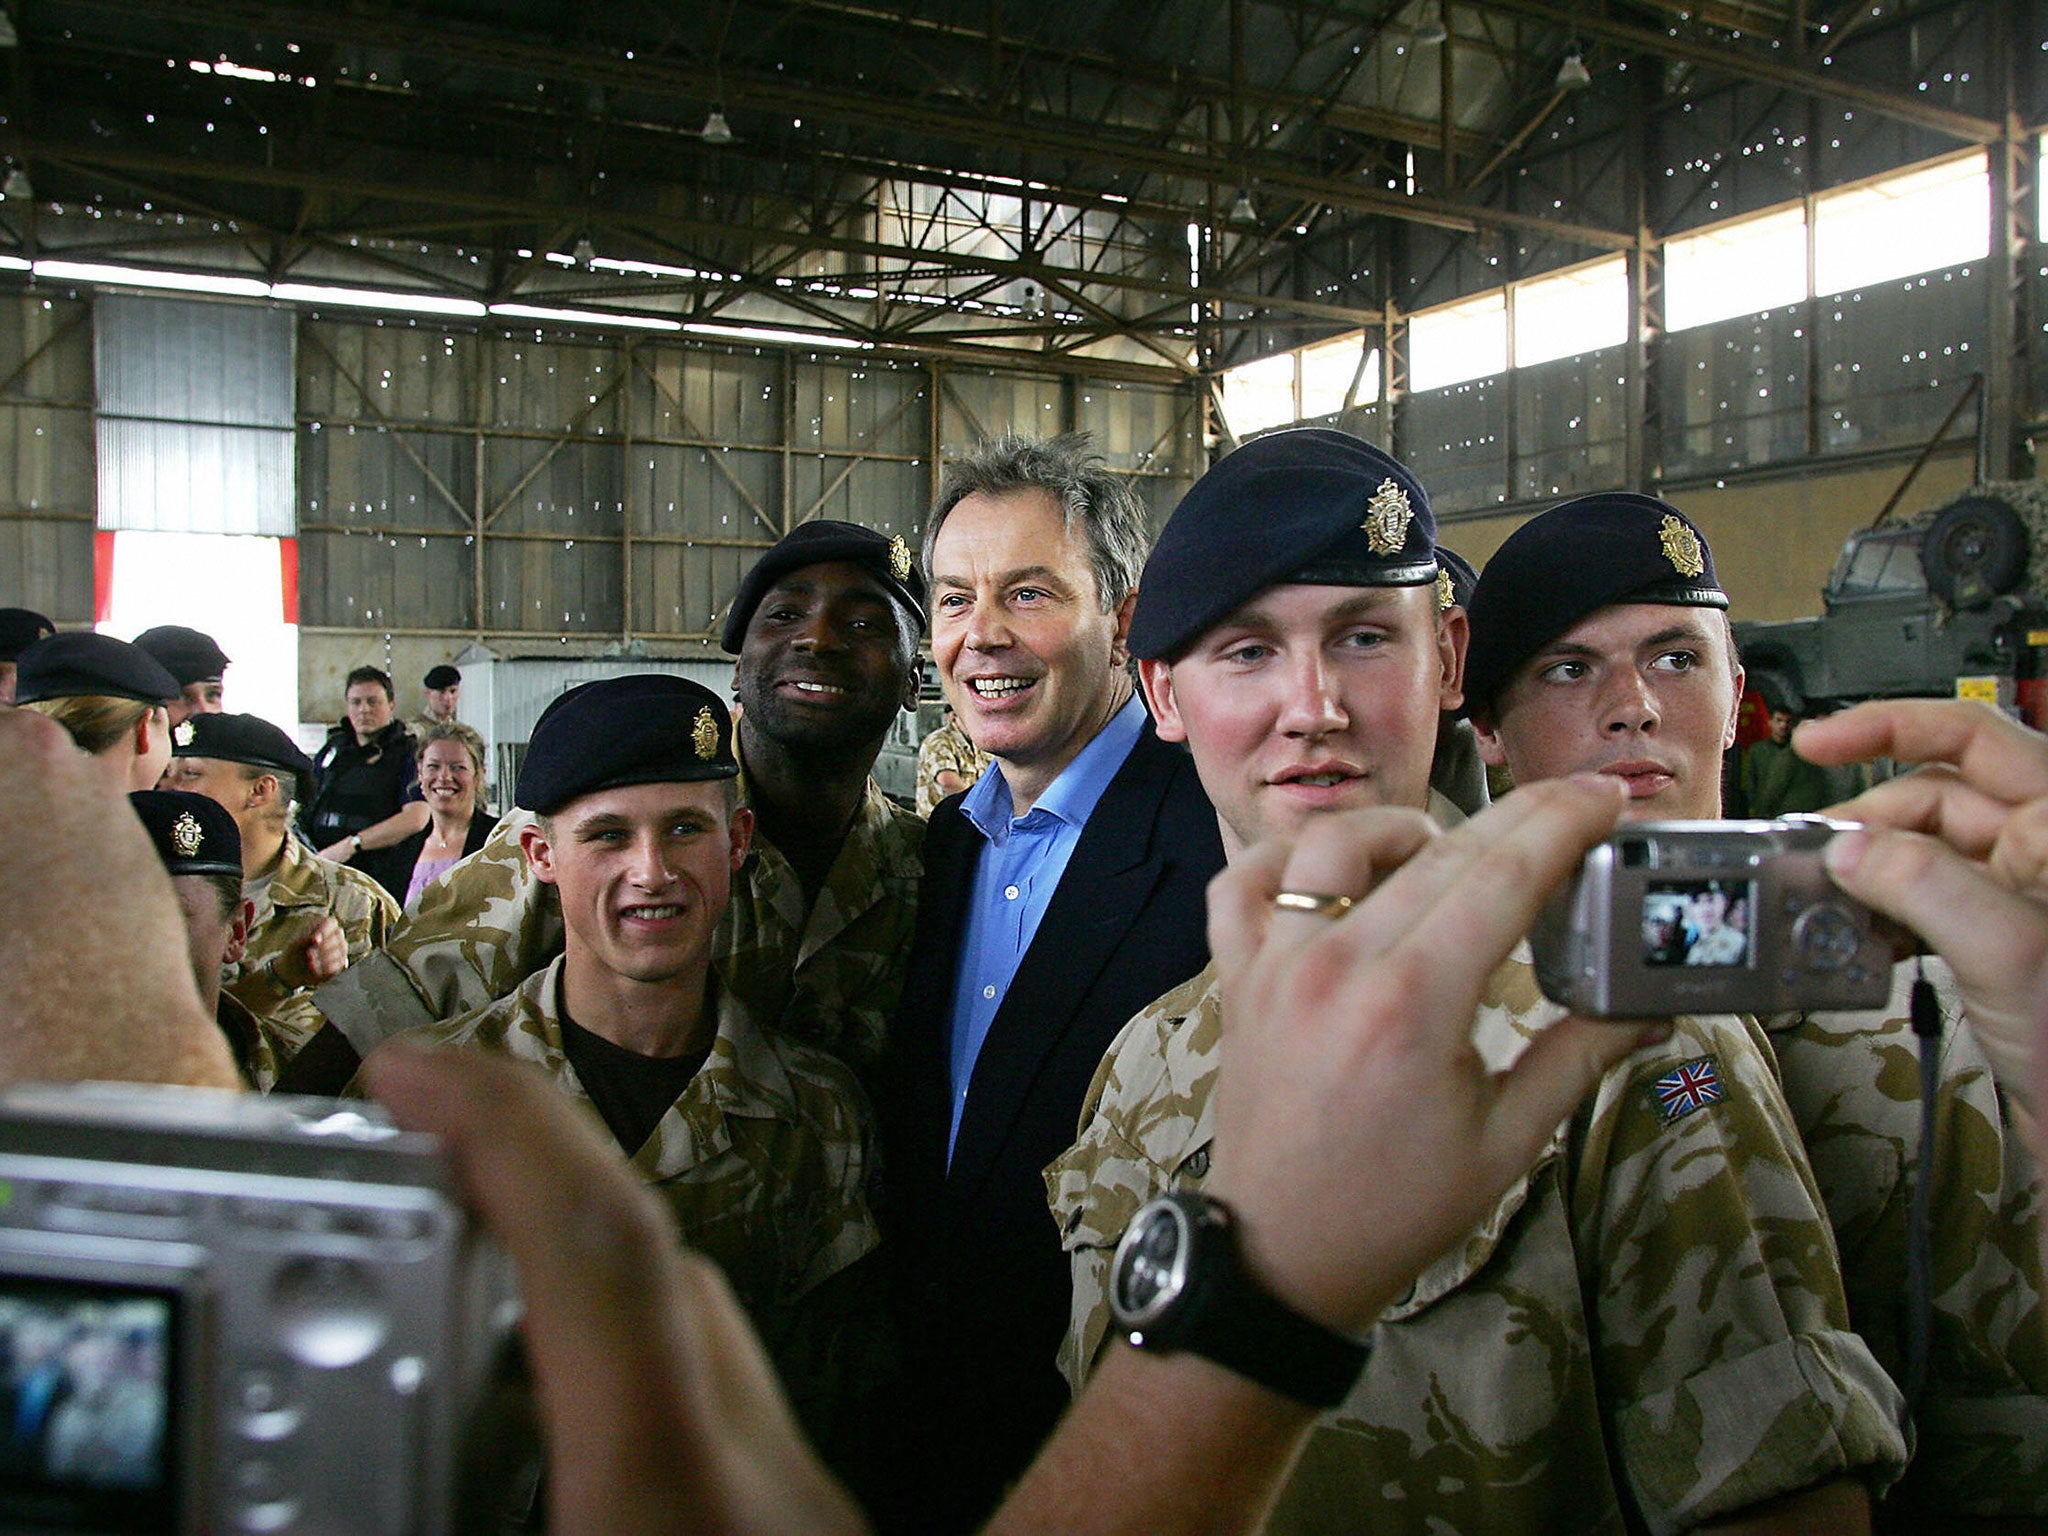 Tony Blair with British troops in Iraq in 2005. He implicitly denied on CNN he was a war criminal, saying he thought the impact of inaction in Syria was worse